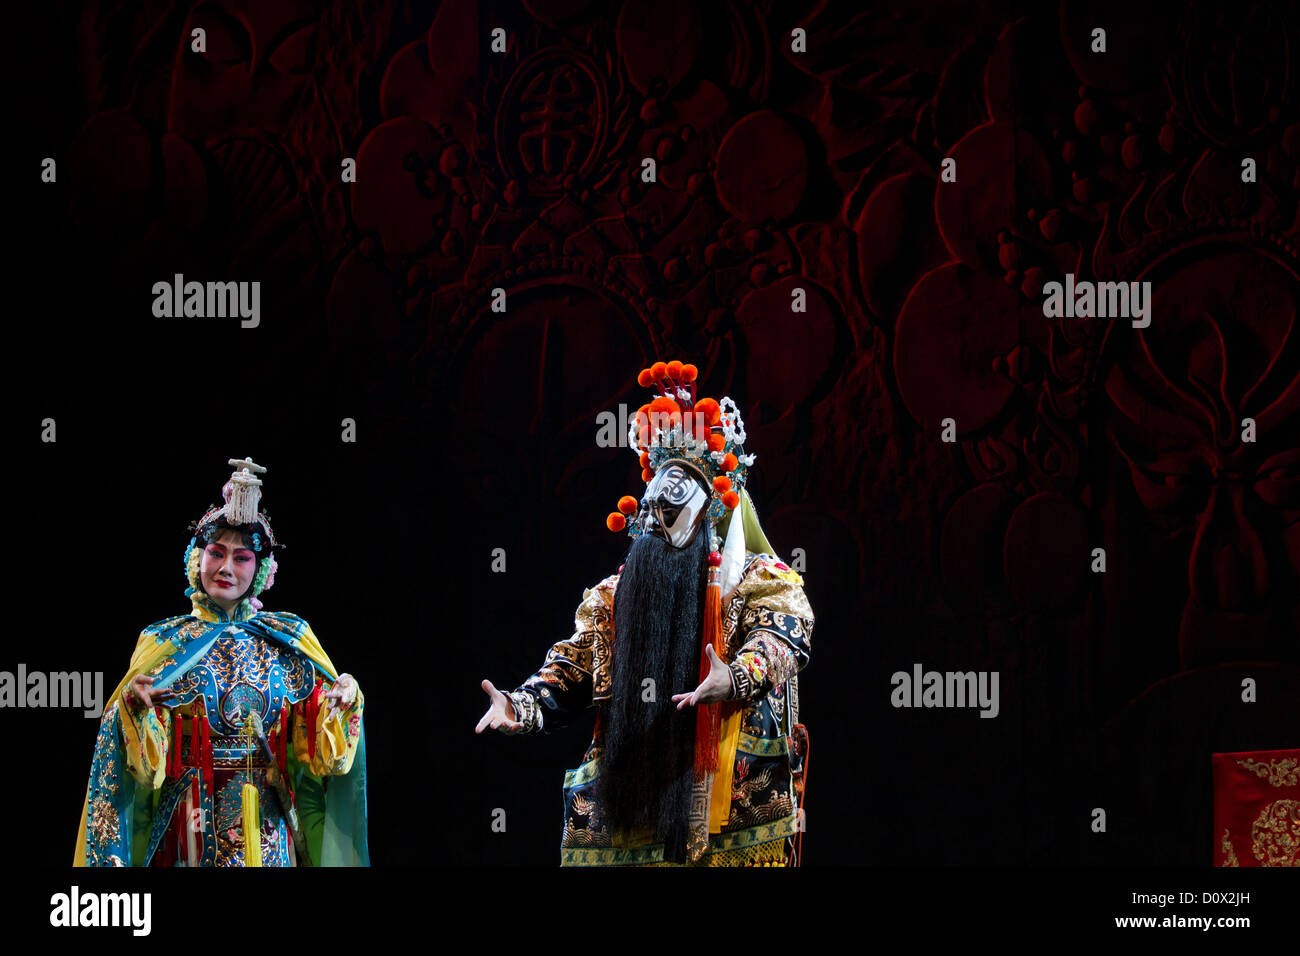 The leading actors in traditional costume pictured during a performance of Peking Opera at a theatre in Beijing, China Stock Photo